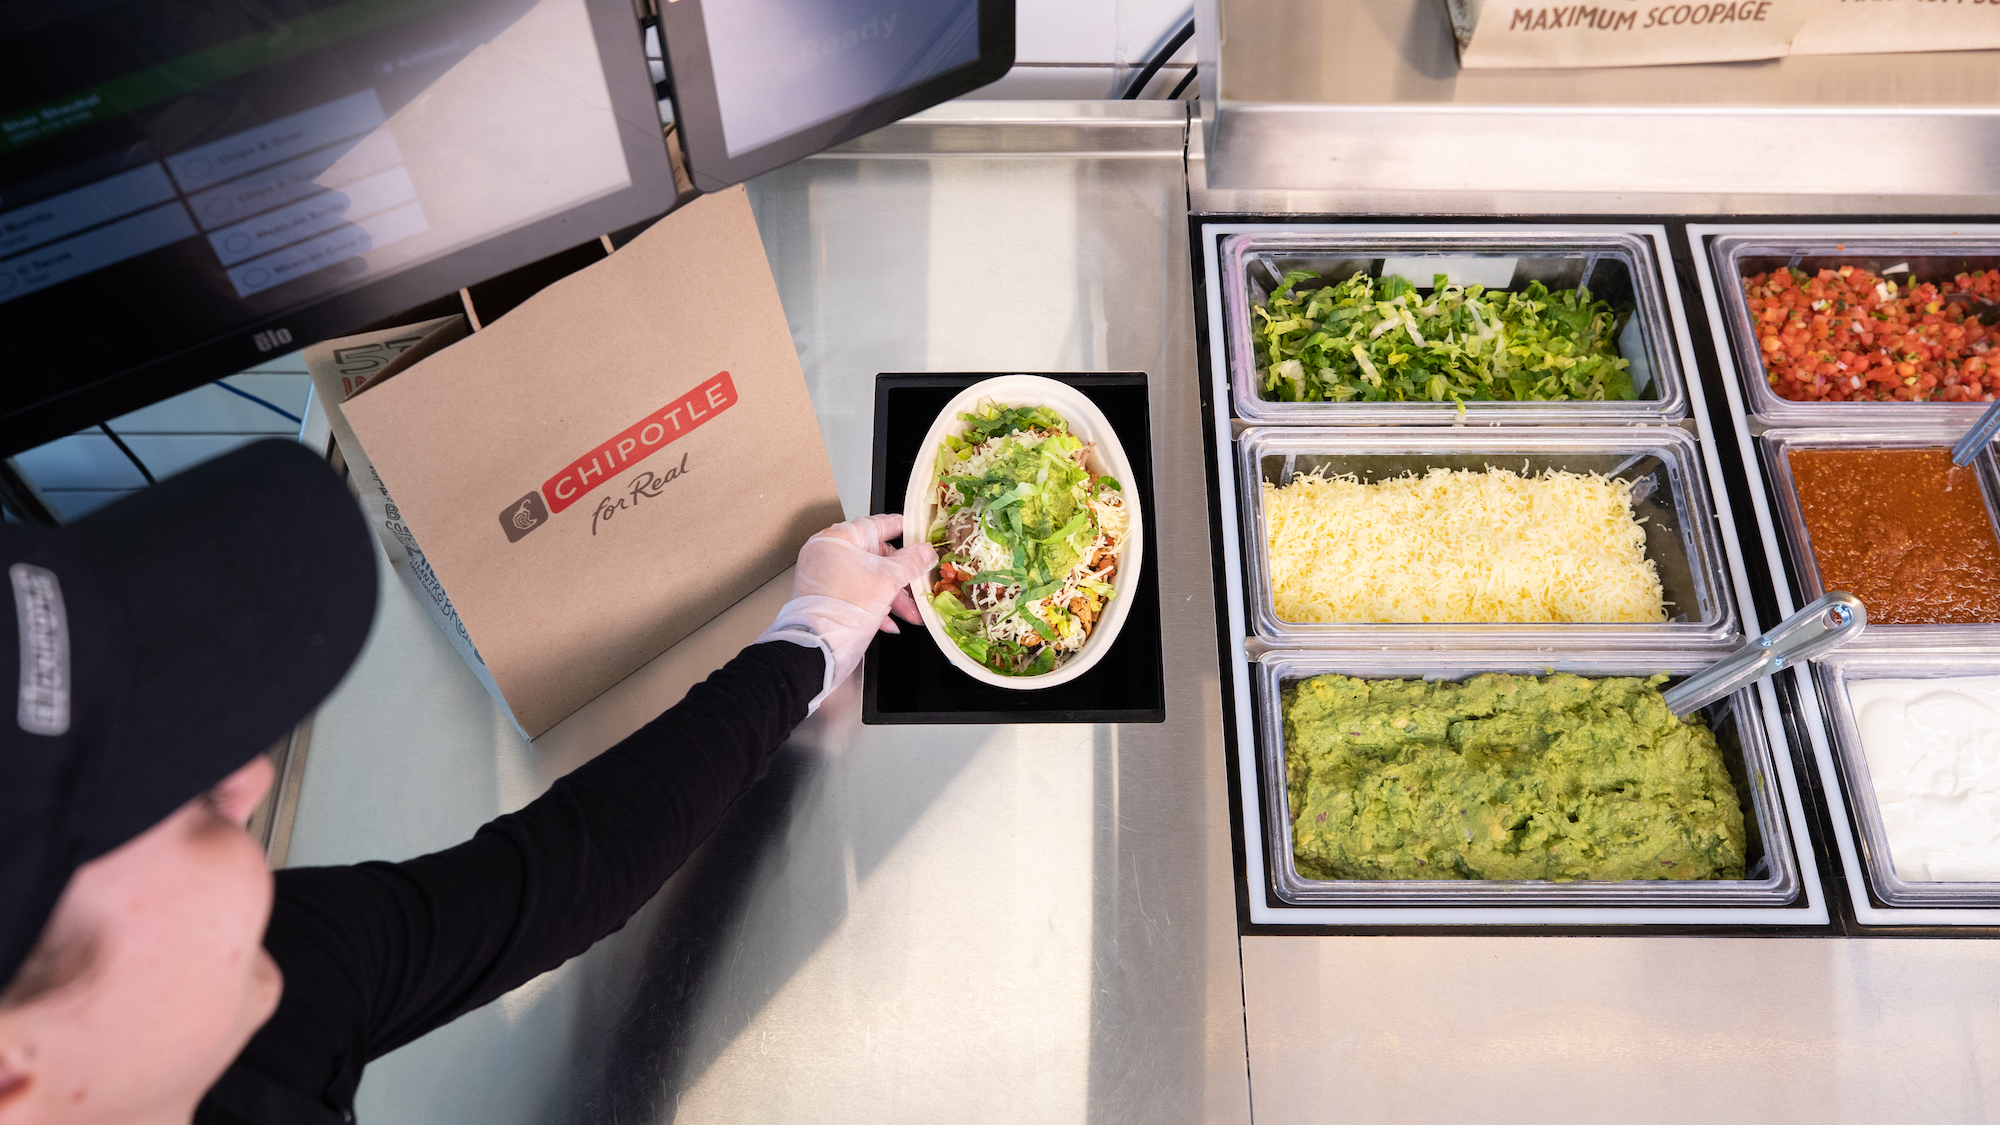 Watch Chipotle’s latest robot prototype plunk ingredients into a burrito bowl